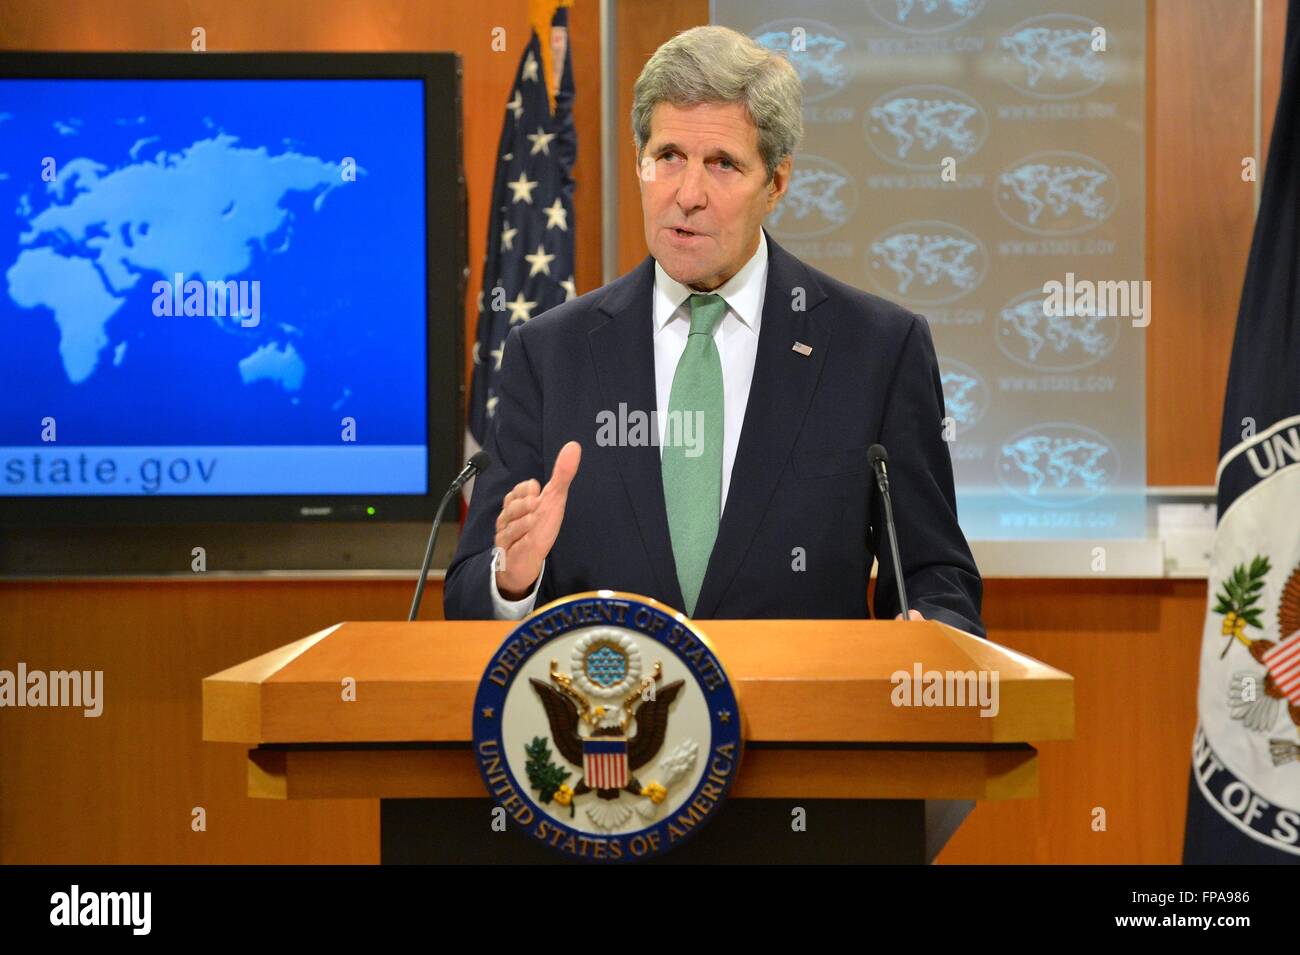 U.S Secretary of State John Kerry during a press conference at the State Department March 17, 2016 in Washington, D.C. Kerry said that the Islamic State is committing genocide against Christians and other minorities in Iraq and Syria. Stock Photo